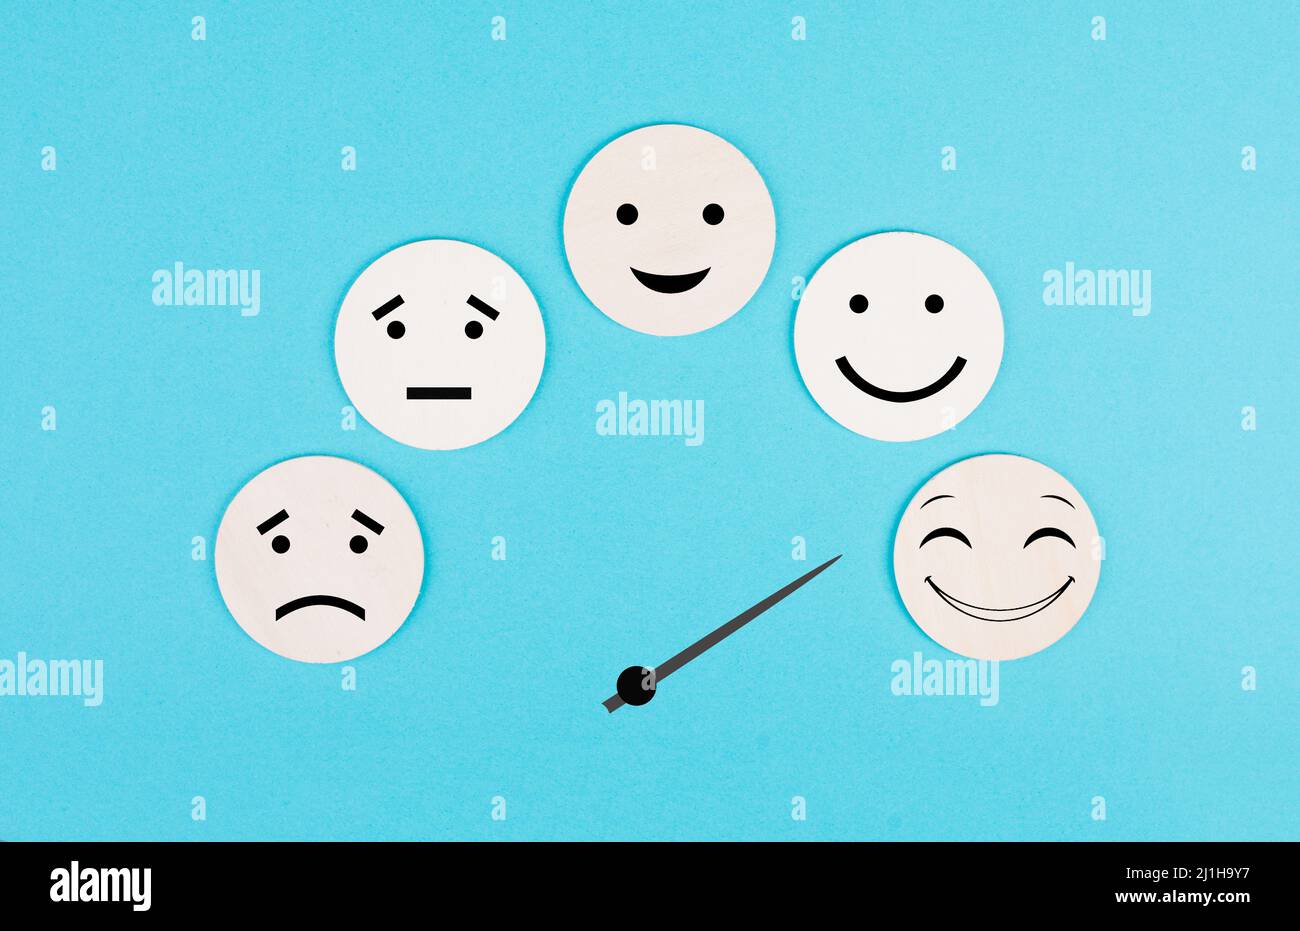 Tachometer with happy and sad faces, business and service rating, evaluation concept, marketing, mood board Stock Photo